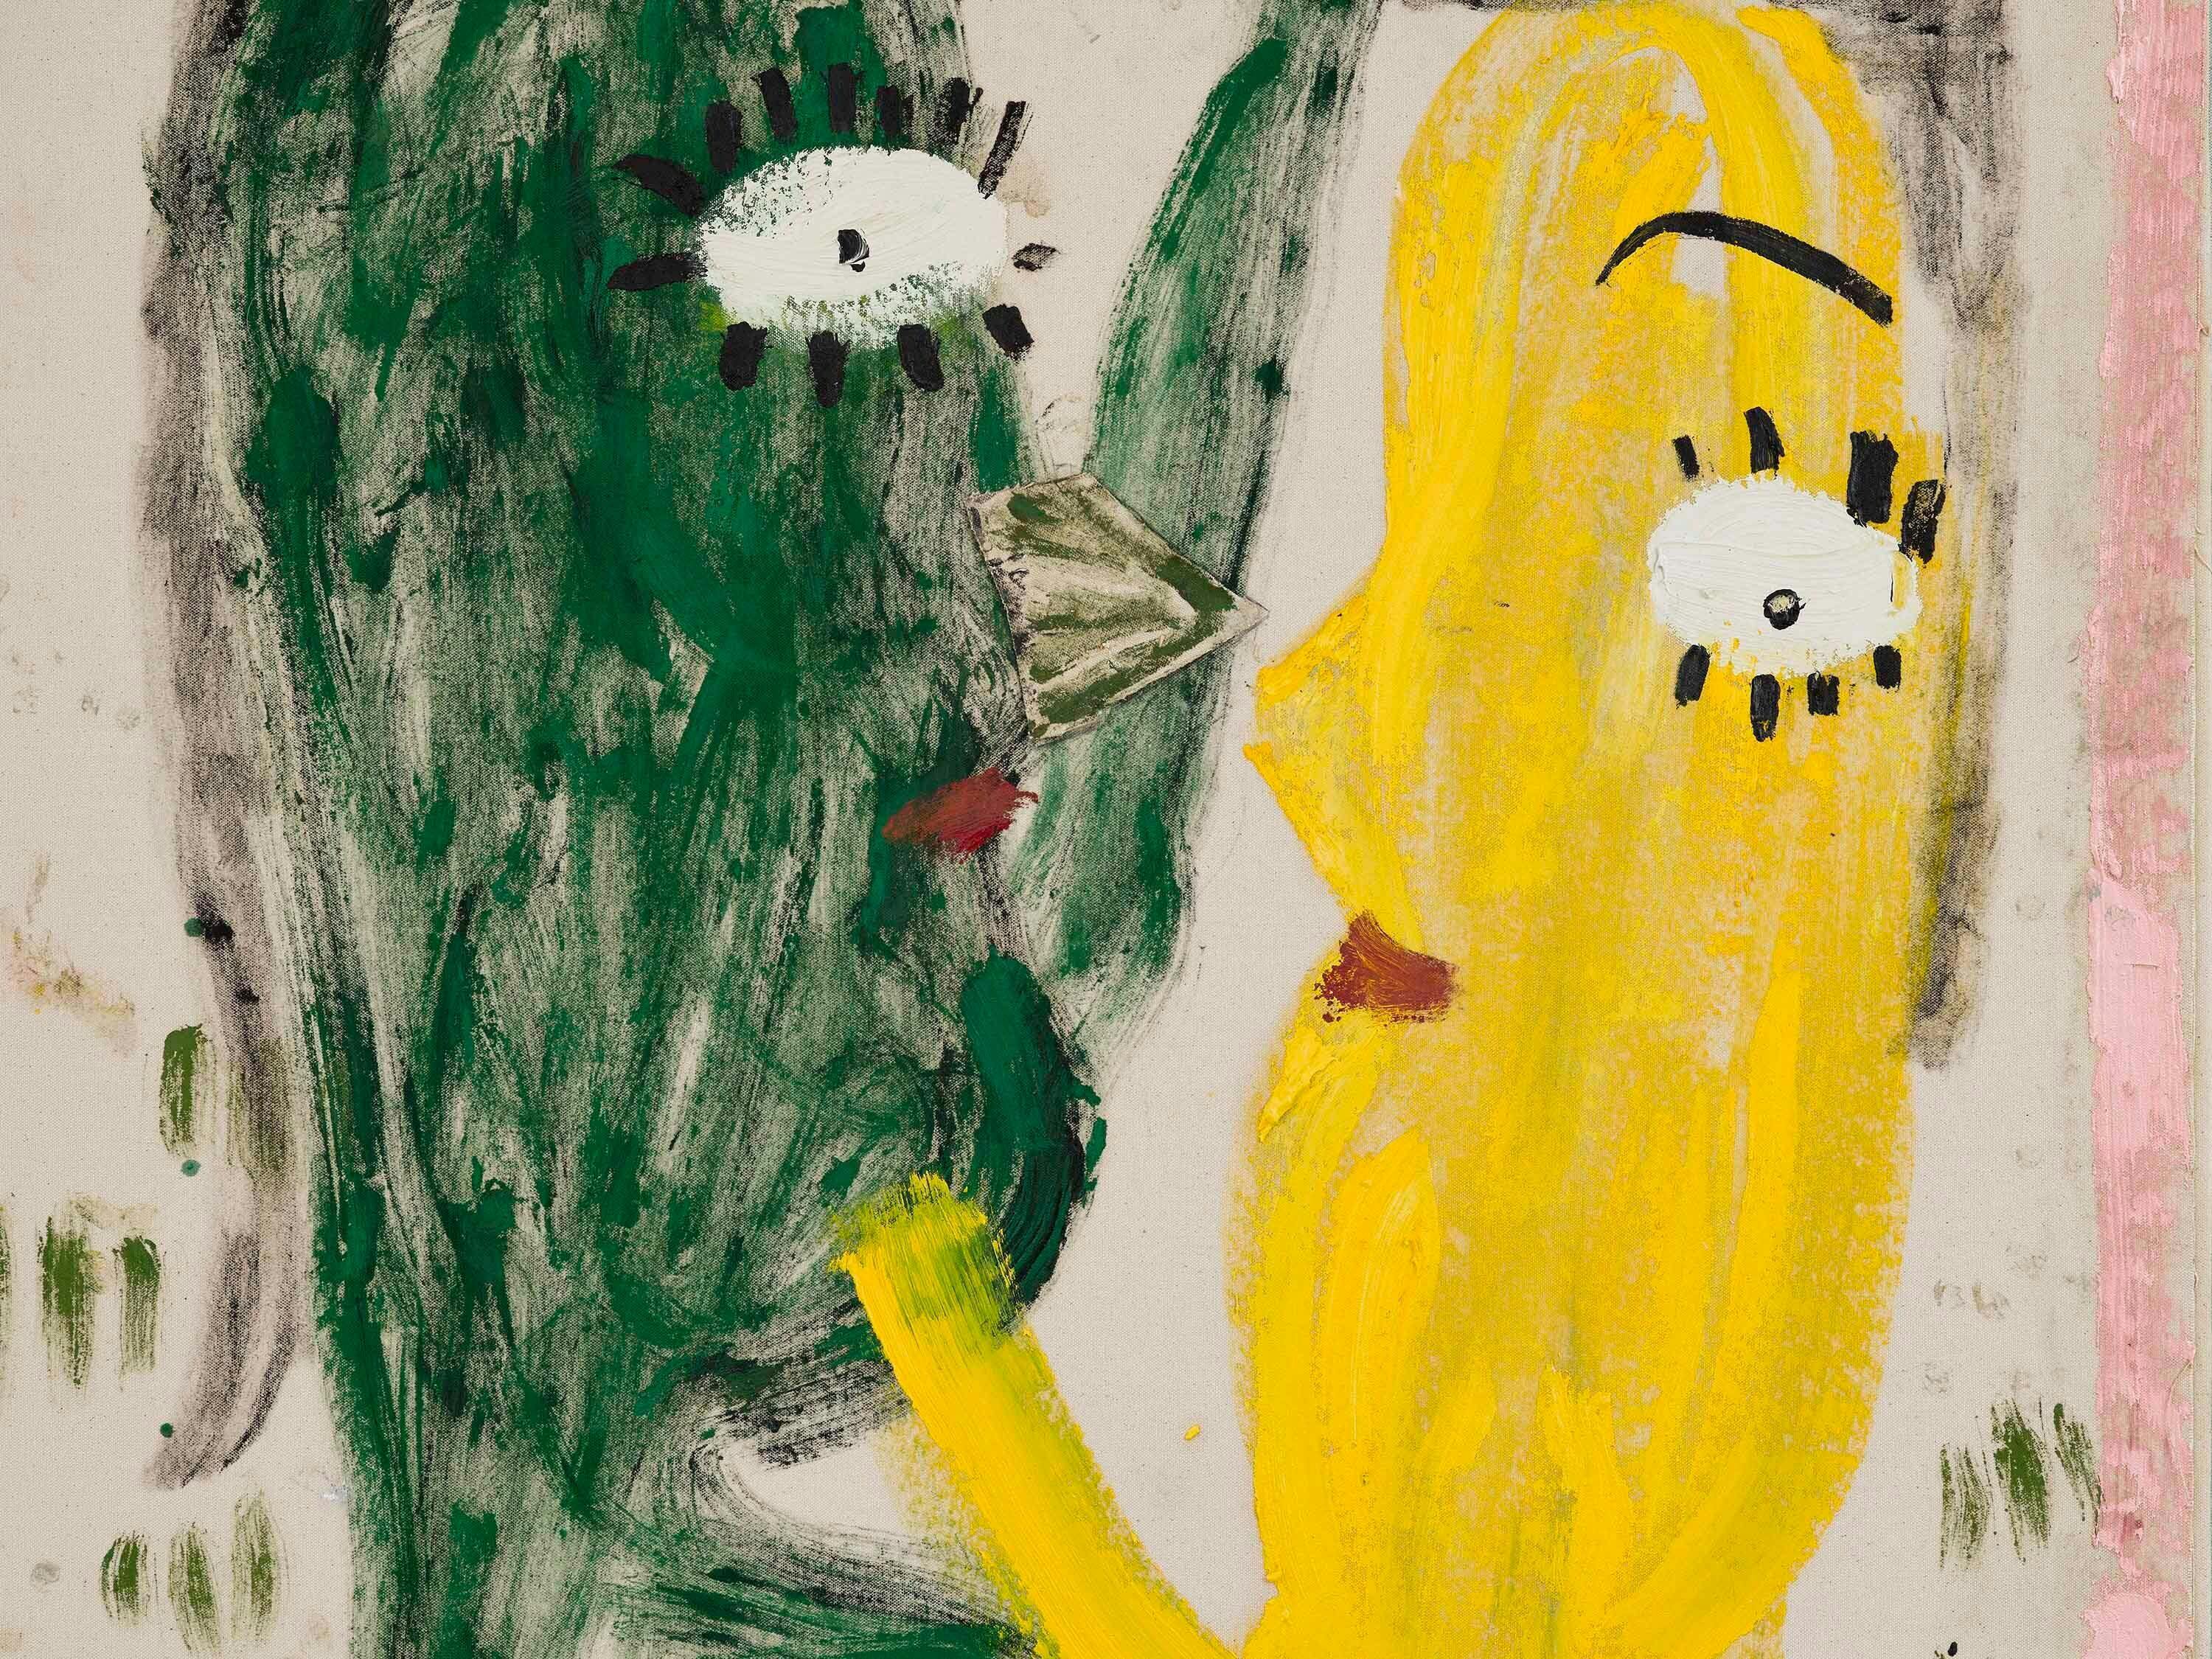 A detail from a painting by Rose Wylie, titled Super Rough 2, Nose & green grass, dated 2021.